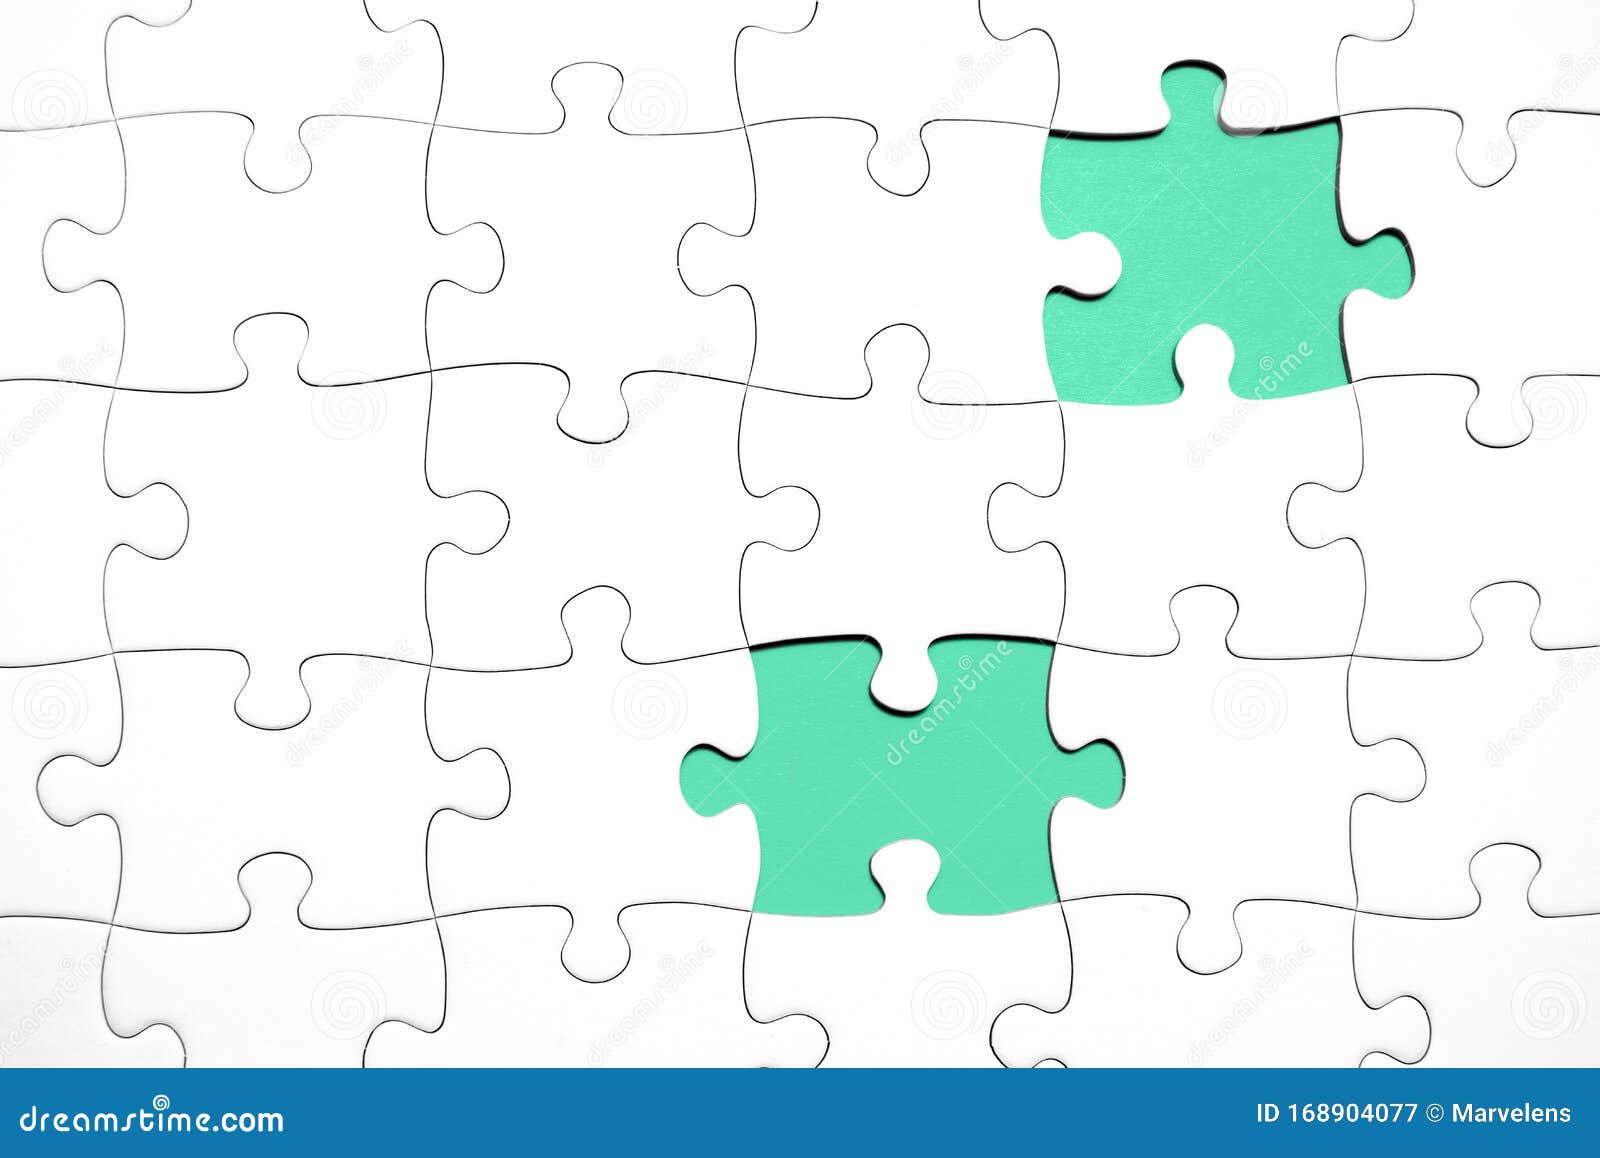 Download Jigsaw Puzzle With Missing Pieces White Puzzle Mockup Stock Illustration Illustration Of Copy Jigsaw 168904077